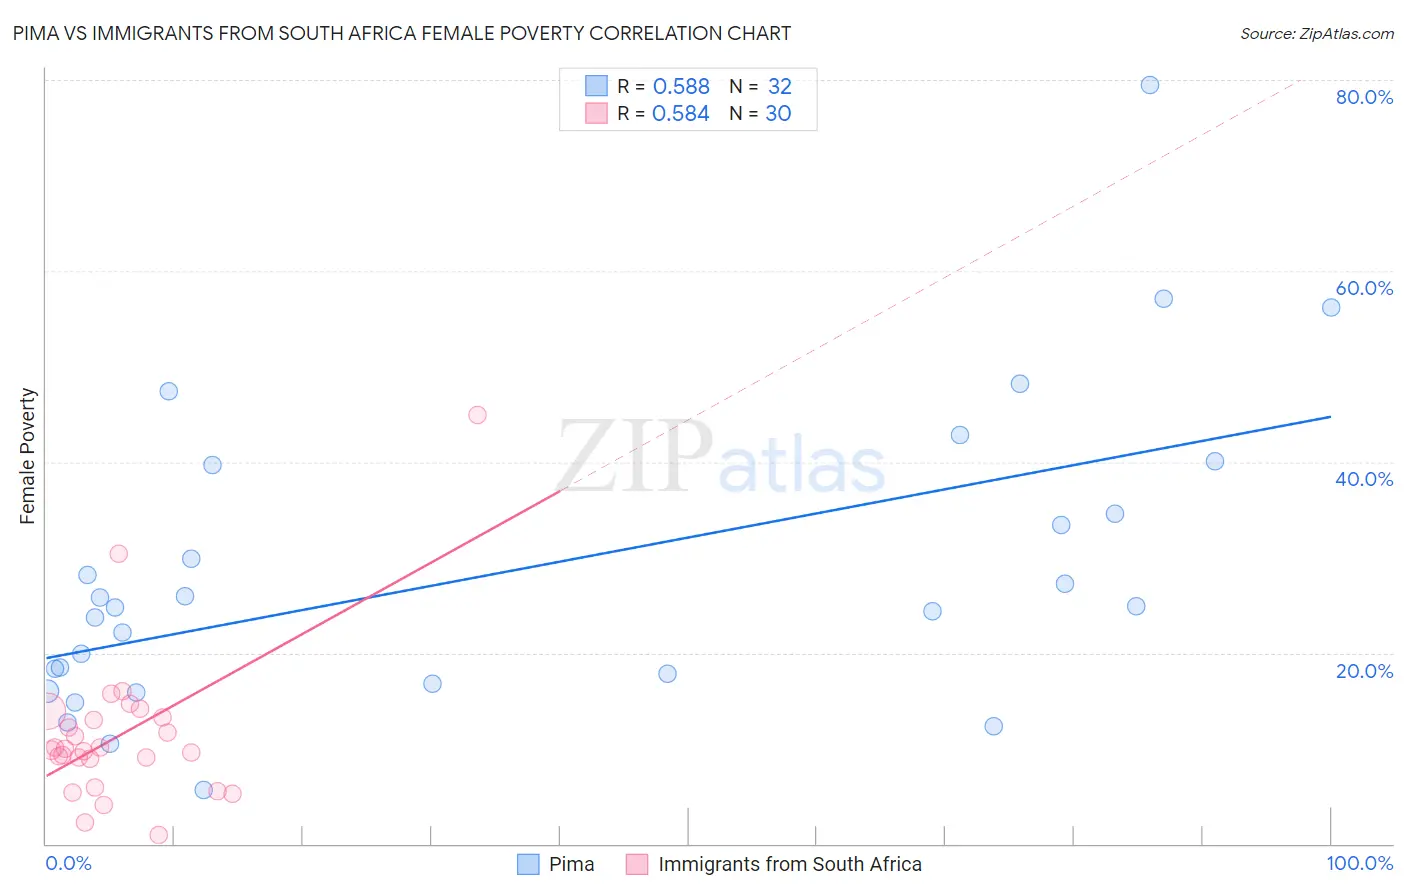 Pima vs Immigrants from South Africa Female Poverty